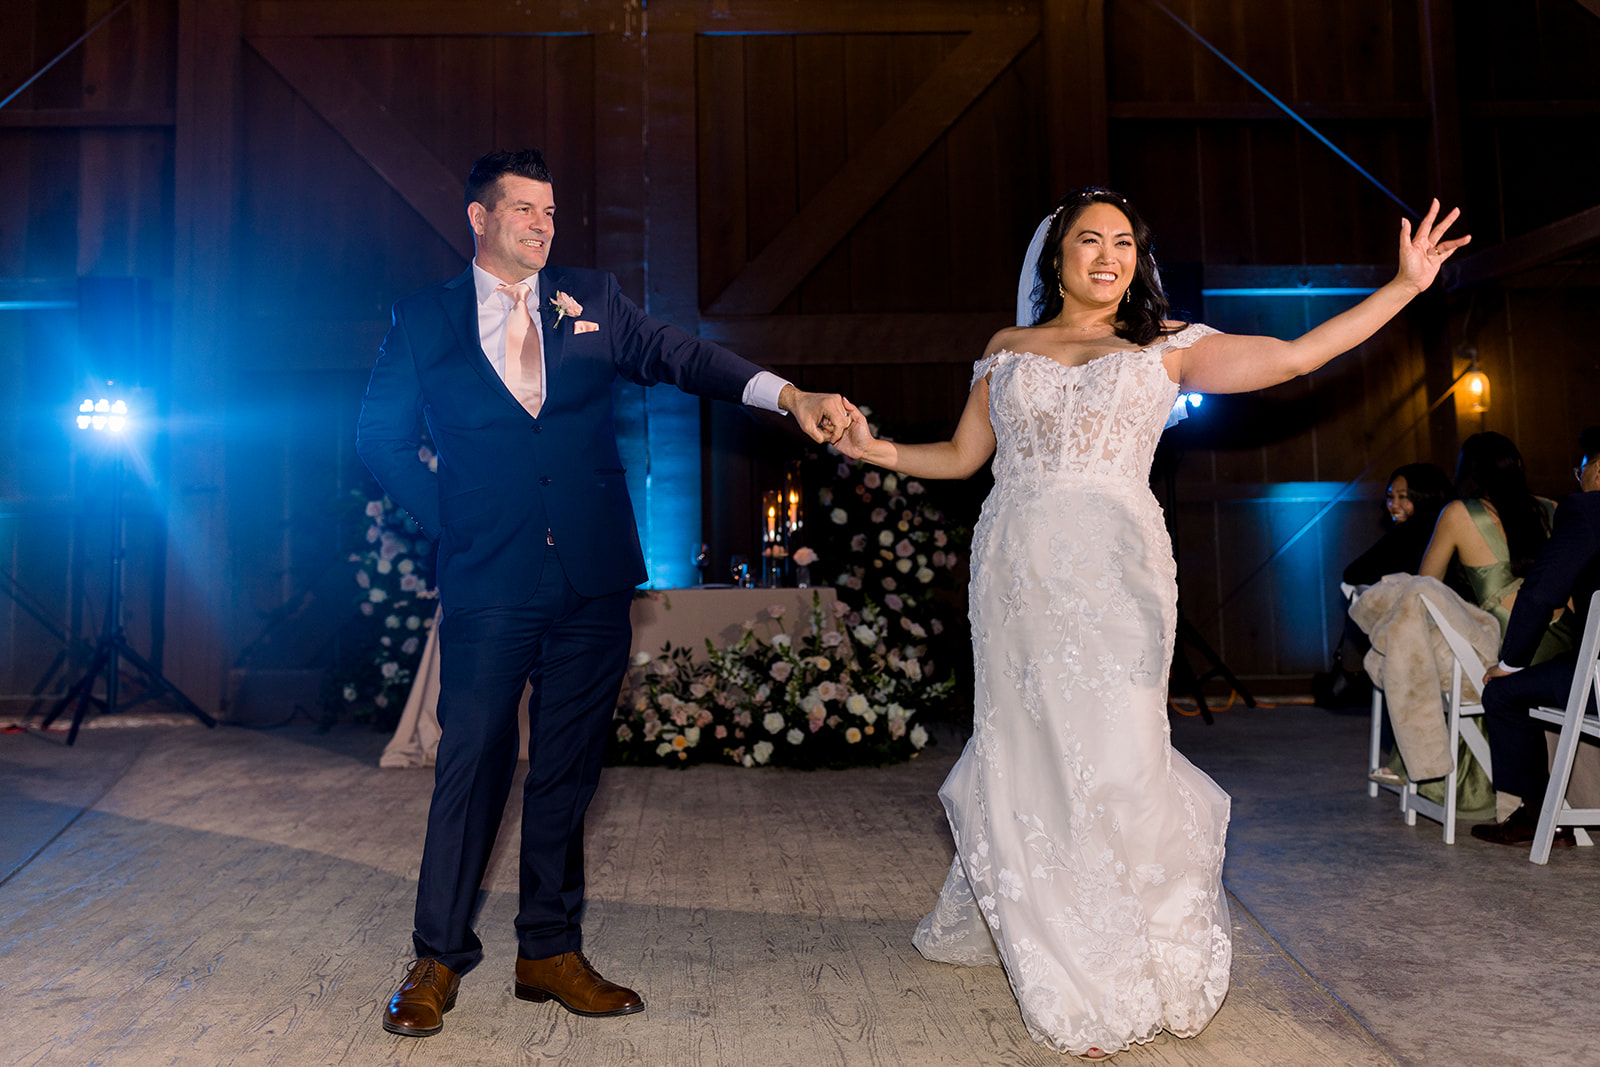 A candid shot captures the infectious laughter of Chris and Rhoda during a joyous moment of their celebration